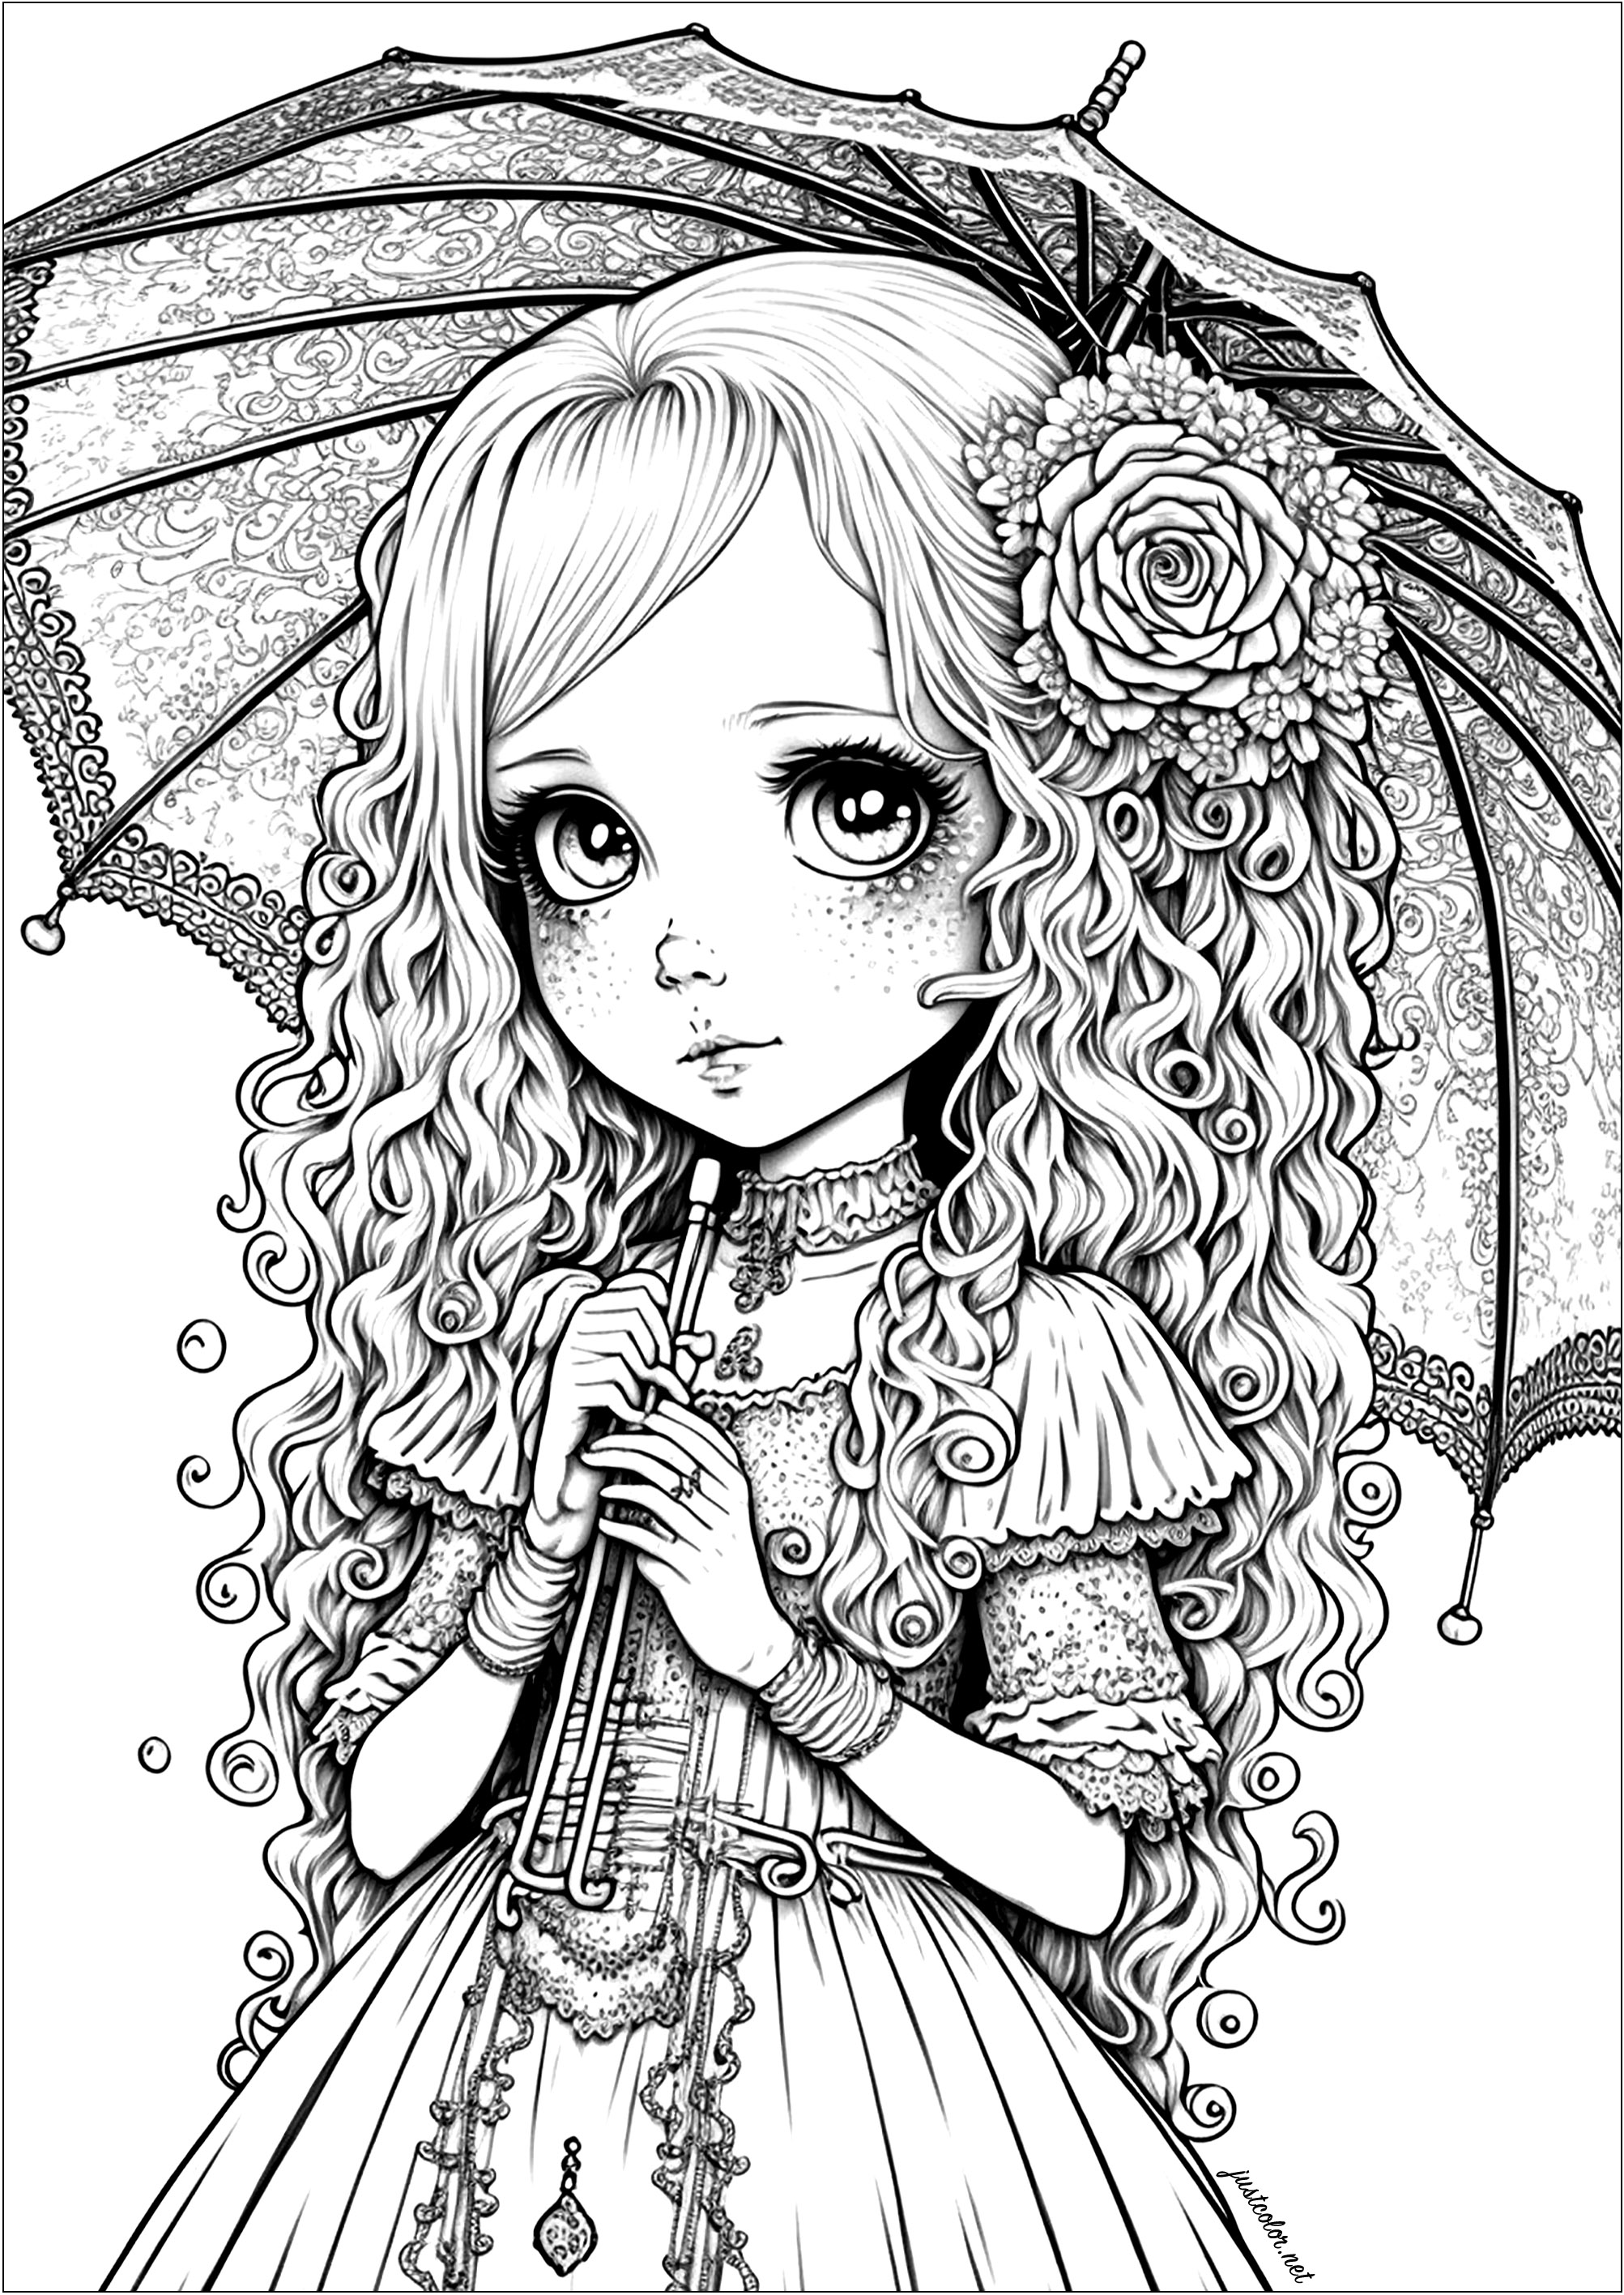 Girl drawn in Manga / Animated style - Manga / Anime Adult Coloring Pages